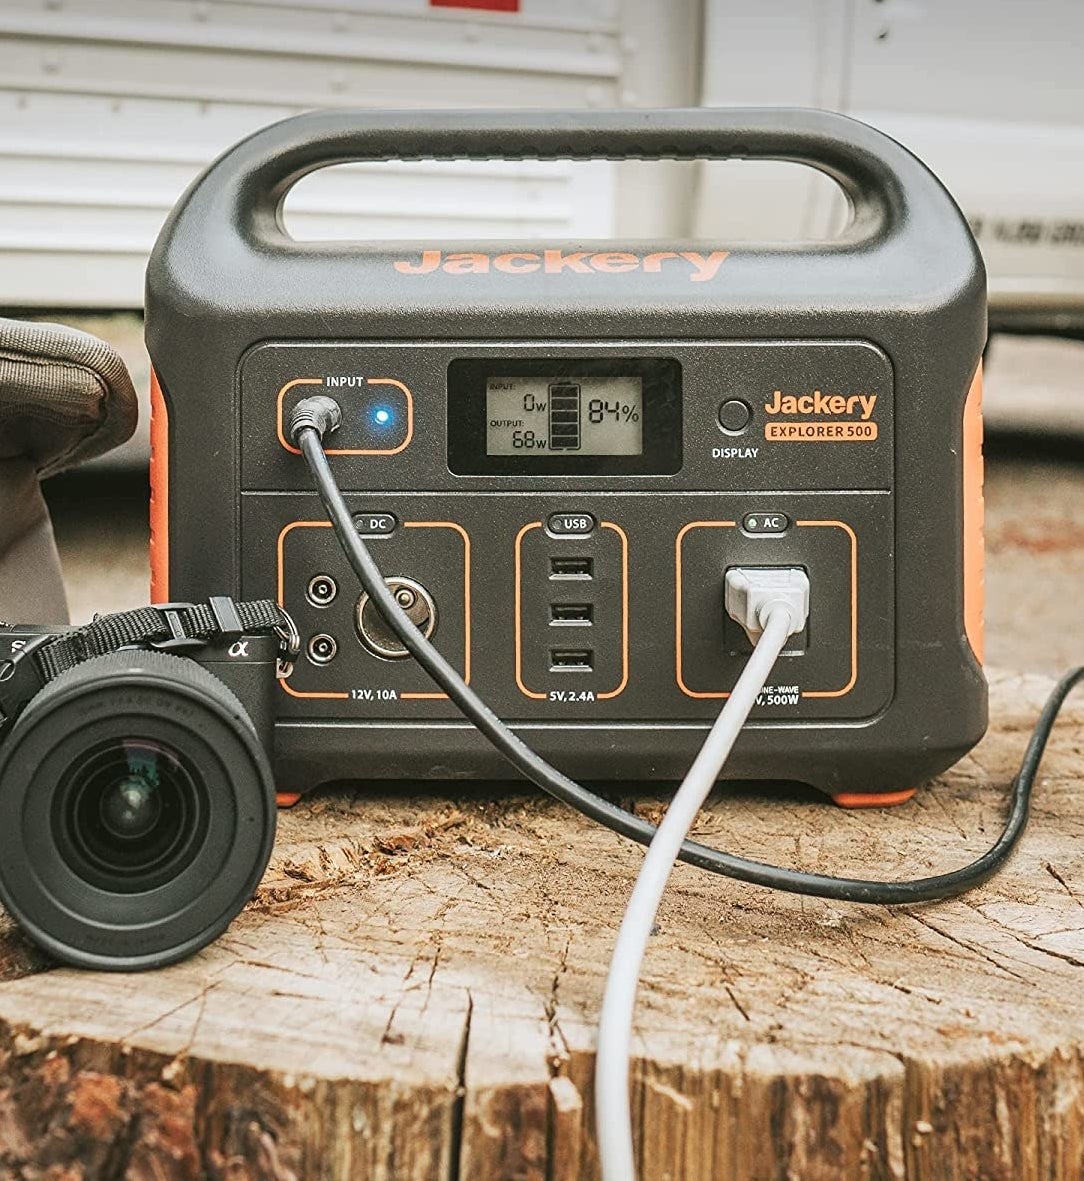 The generator on a stump with cords plugged into it